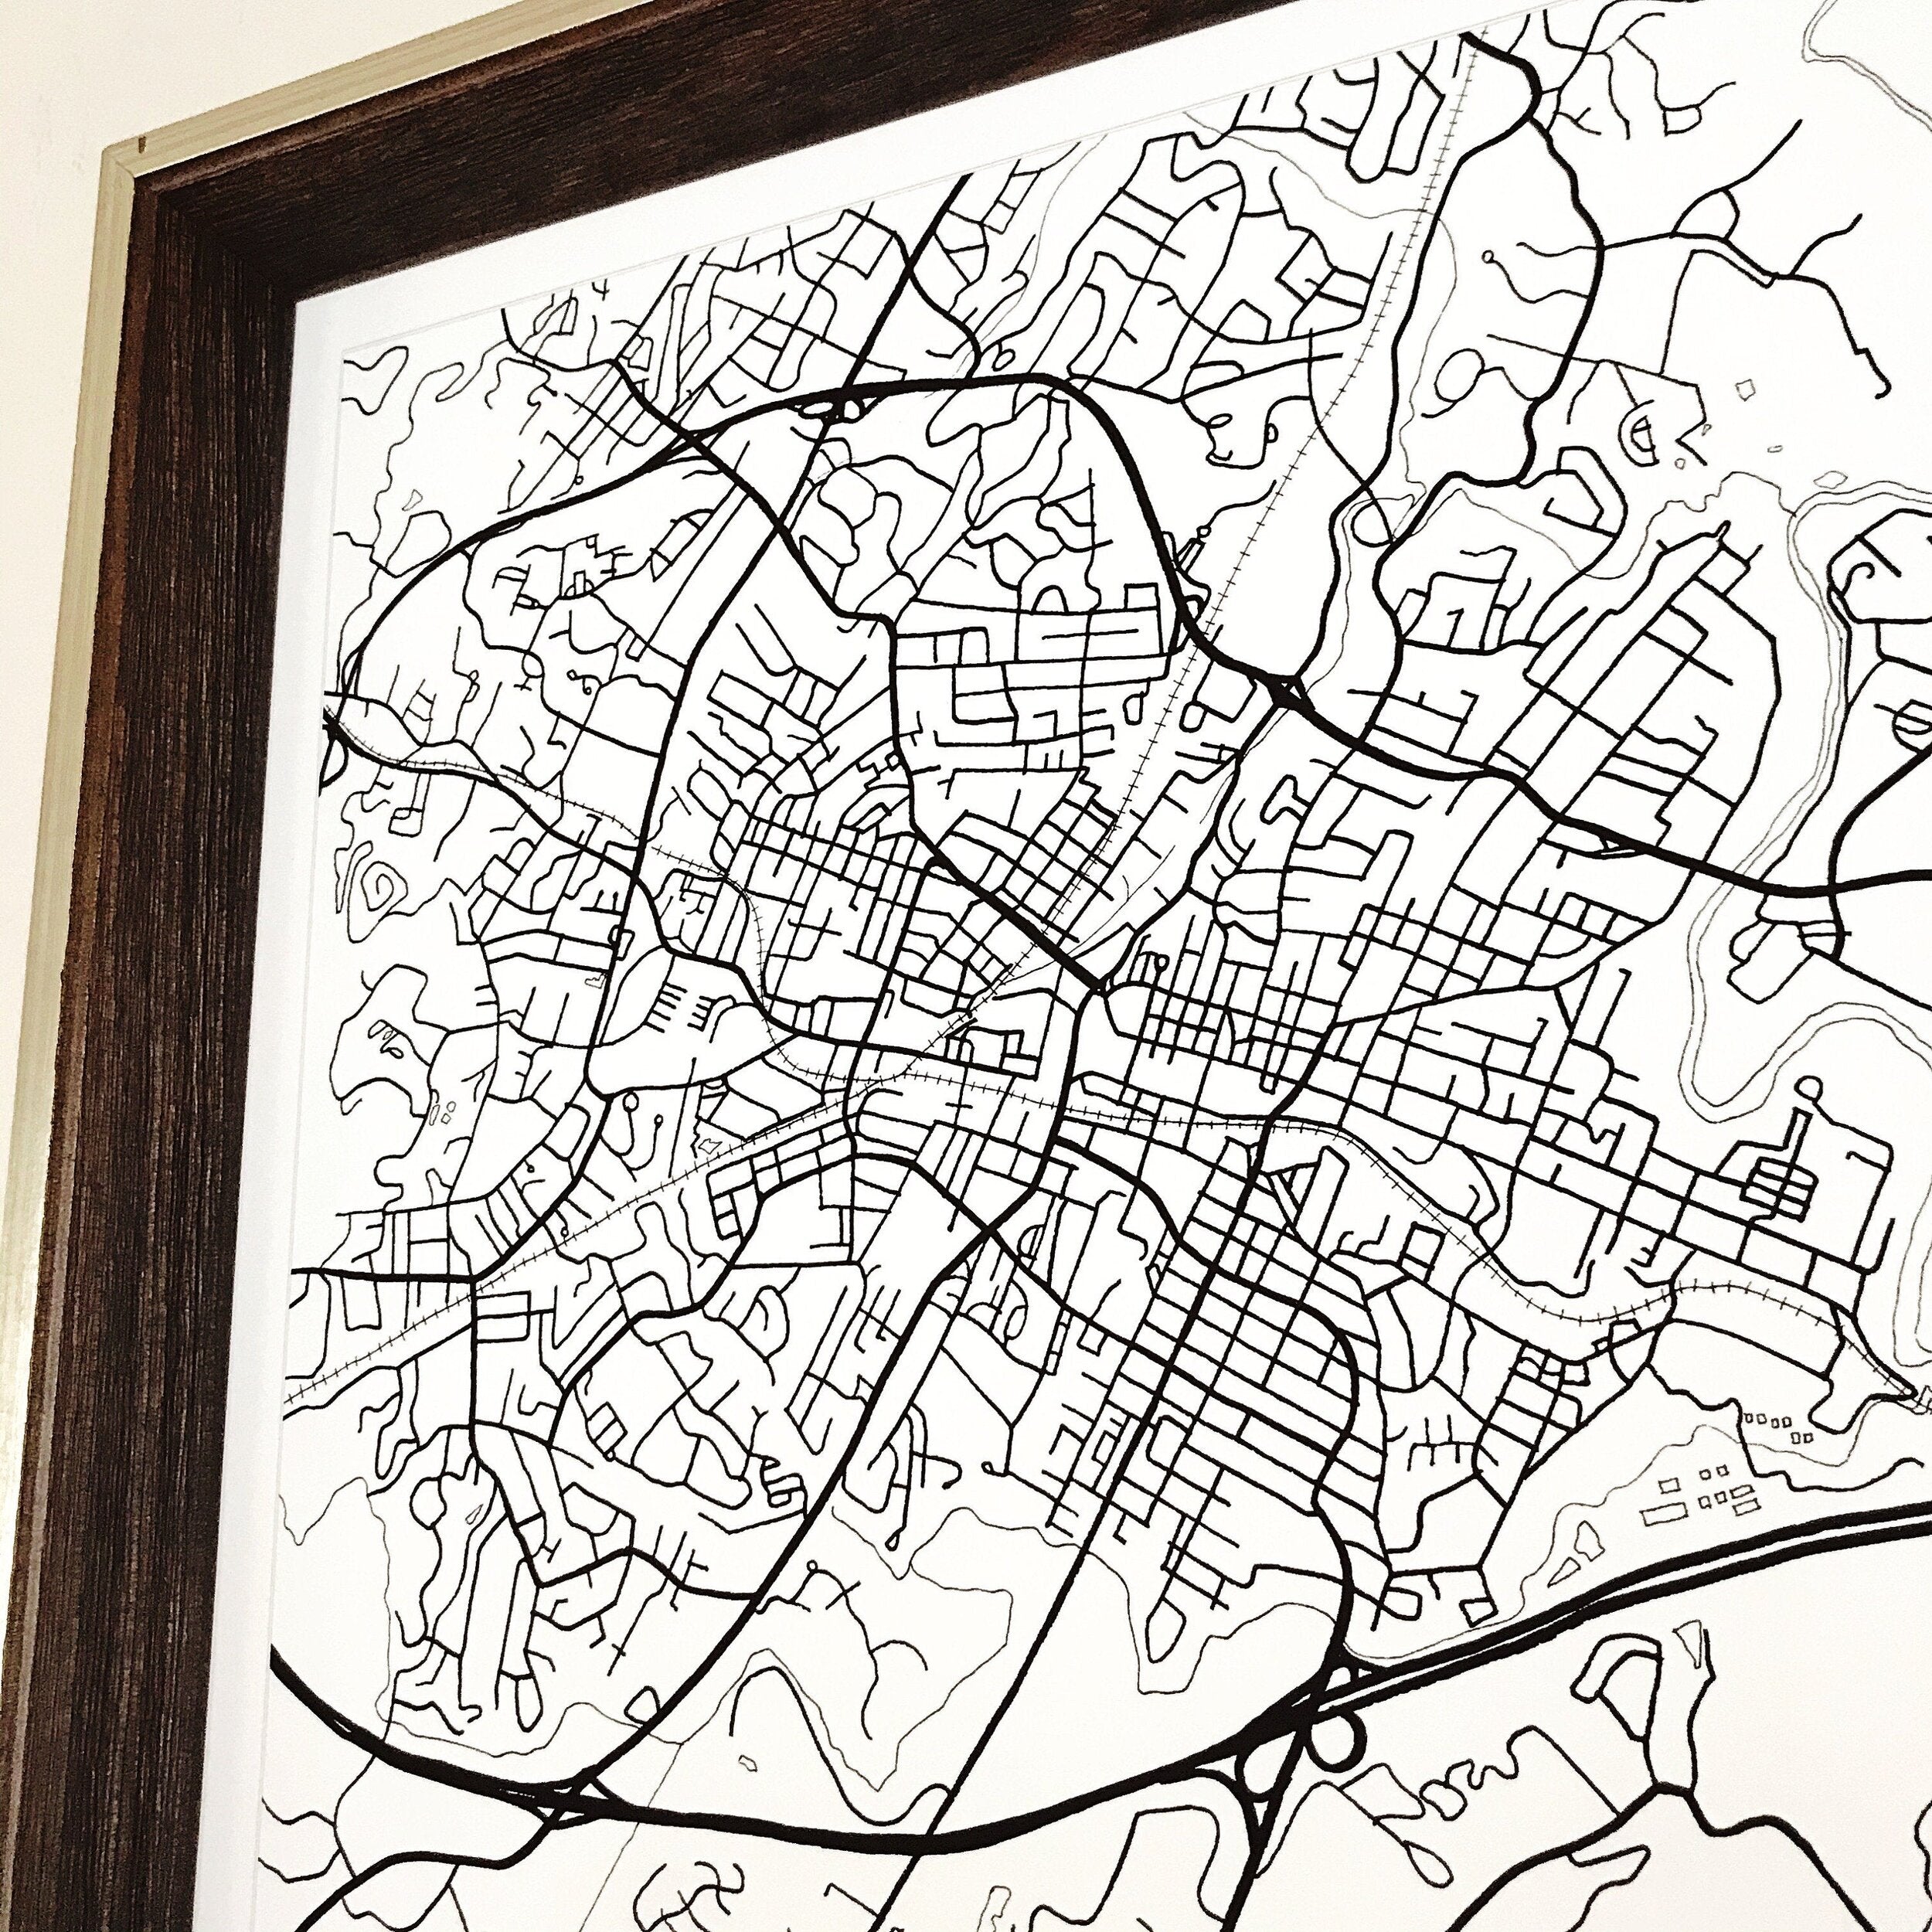 CHARLOTTESVILLE City Lines Map: PRINT